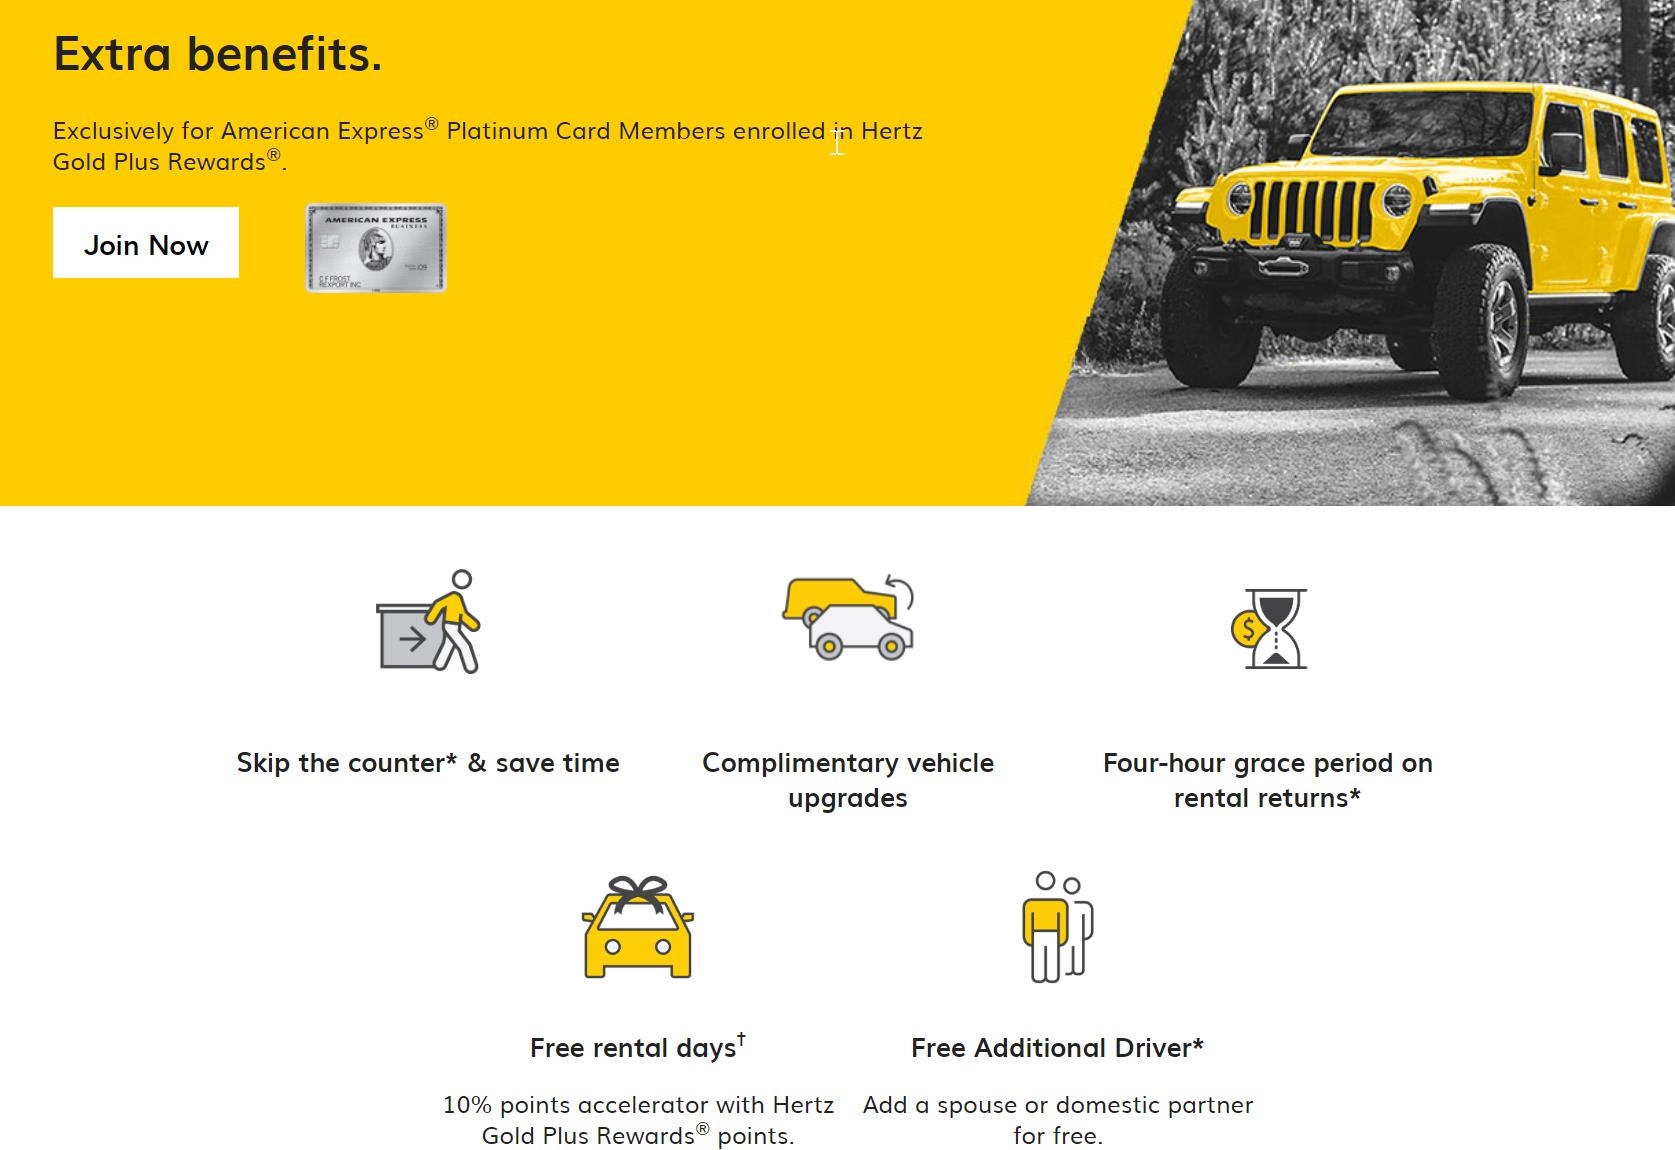 The American Express Platinum Hertz benefit has saved me over $1000/yr on rental  cars